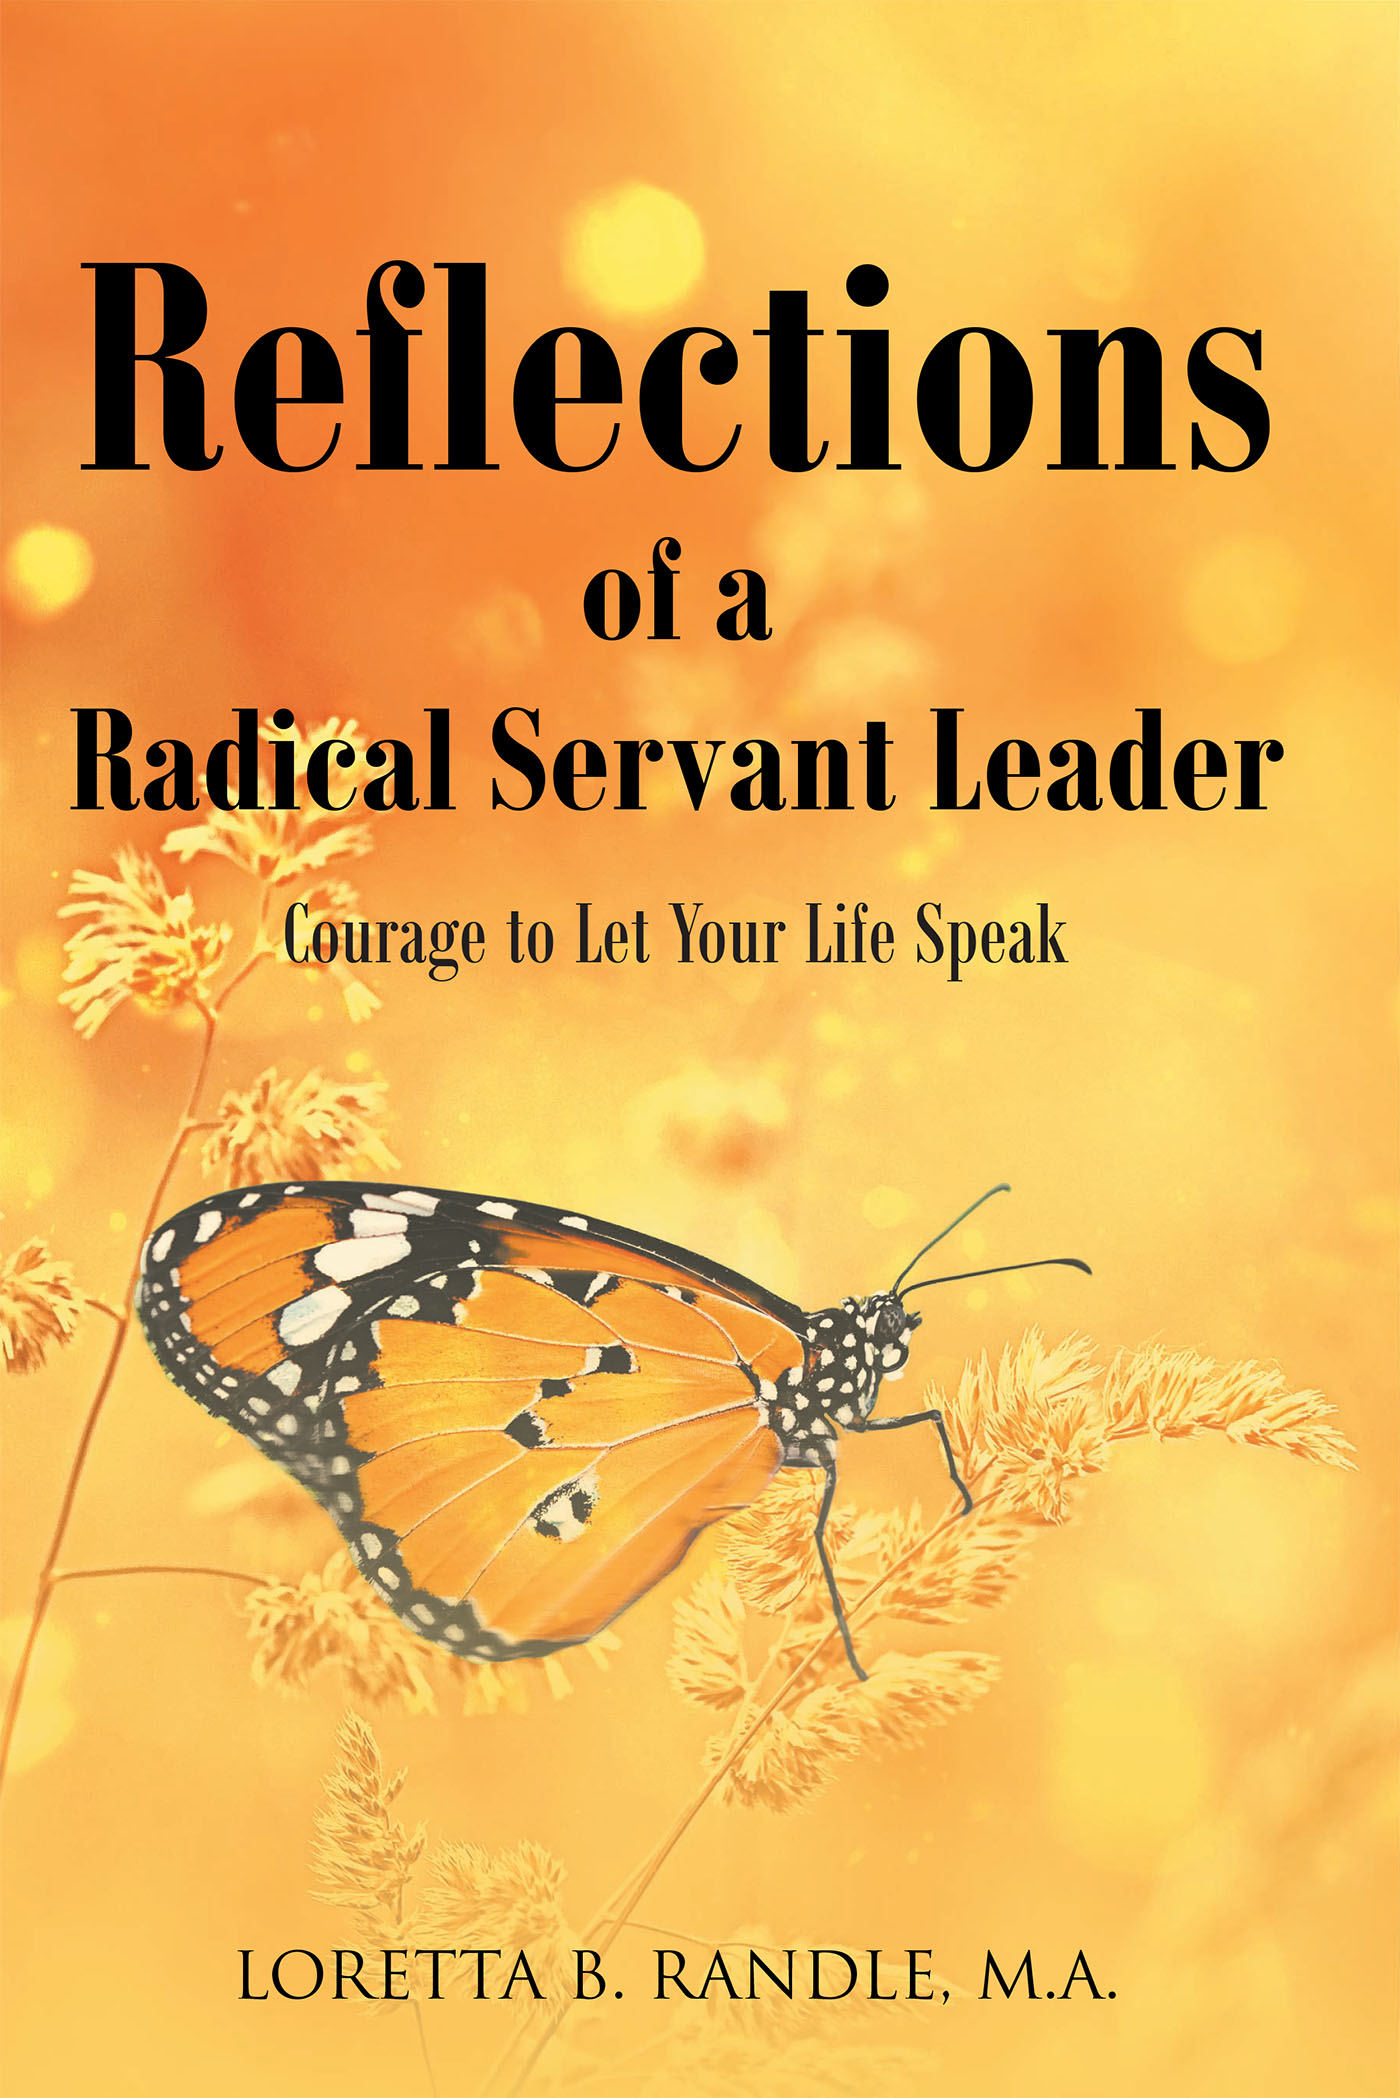 Loretta B. Randle, M.A.’s Newly Released “Reflections of a Radical Servant Leader: Courage to Let Your Life Speak” is a Potent Biographical Study